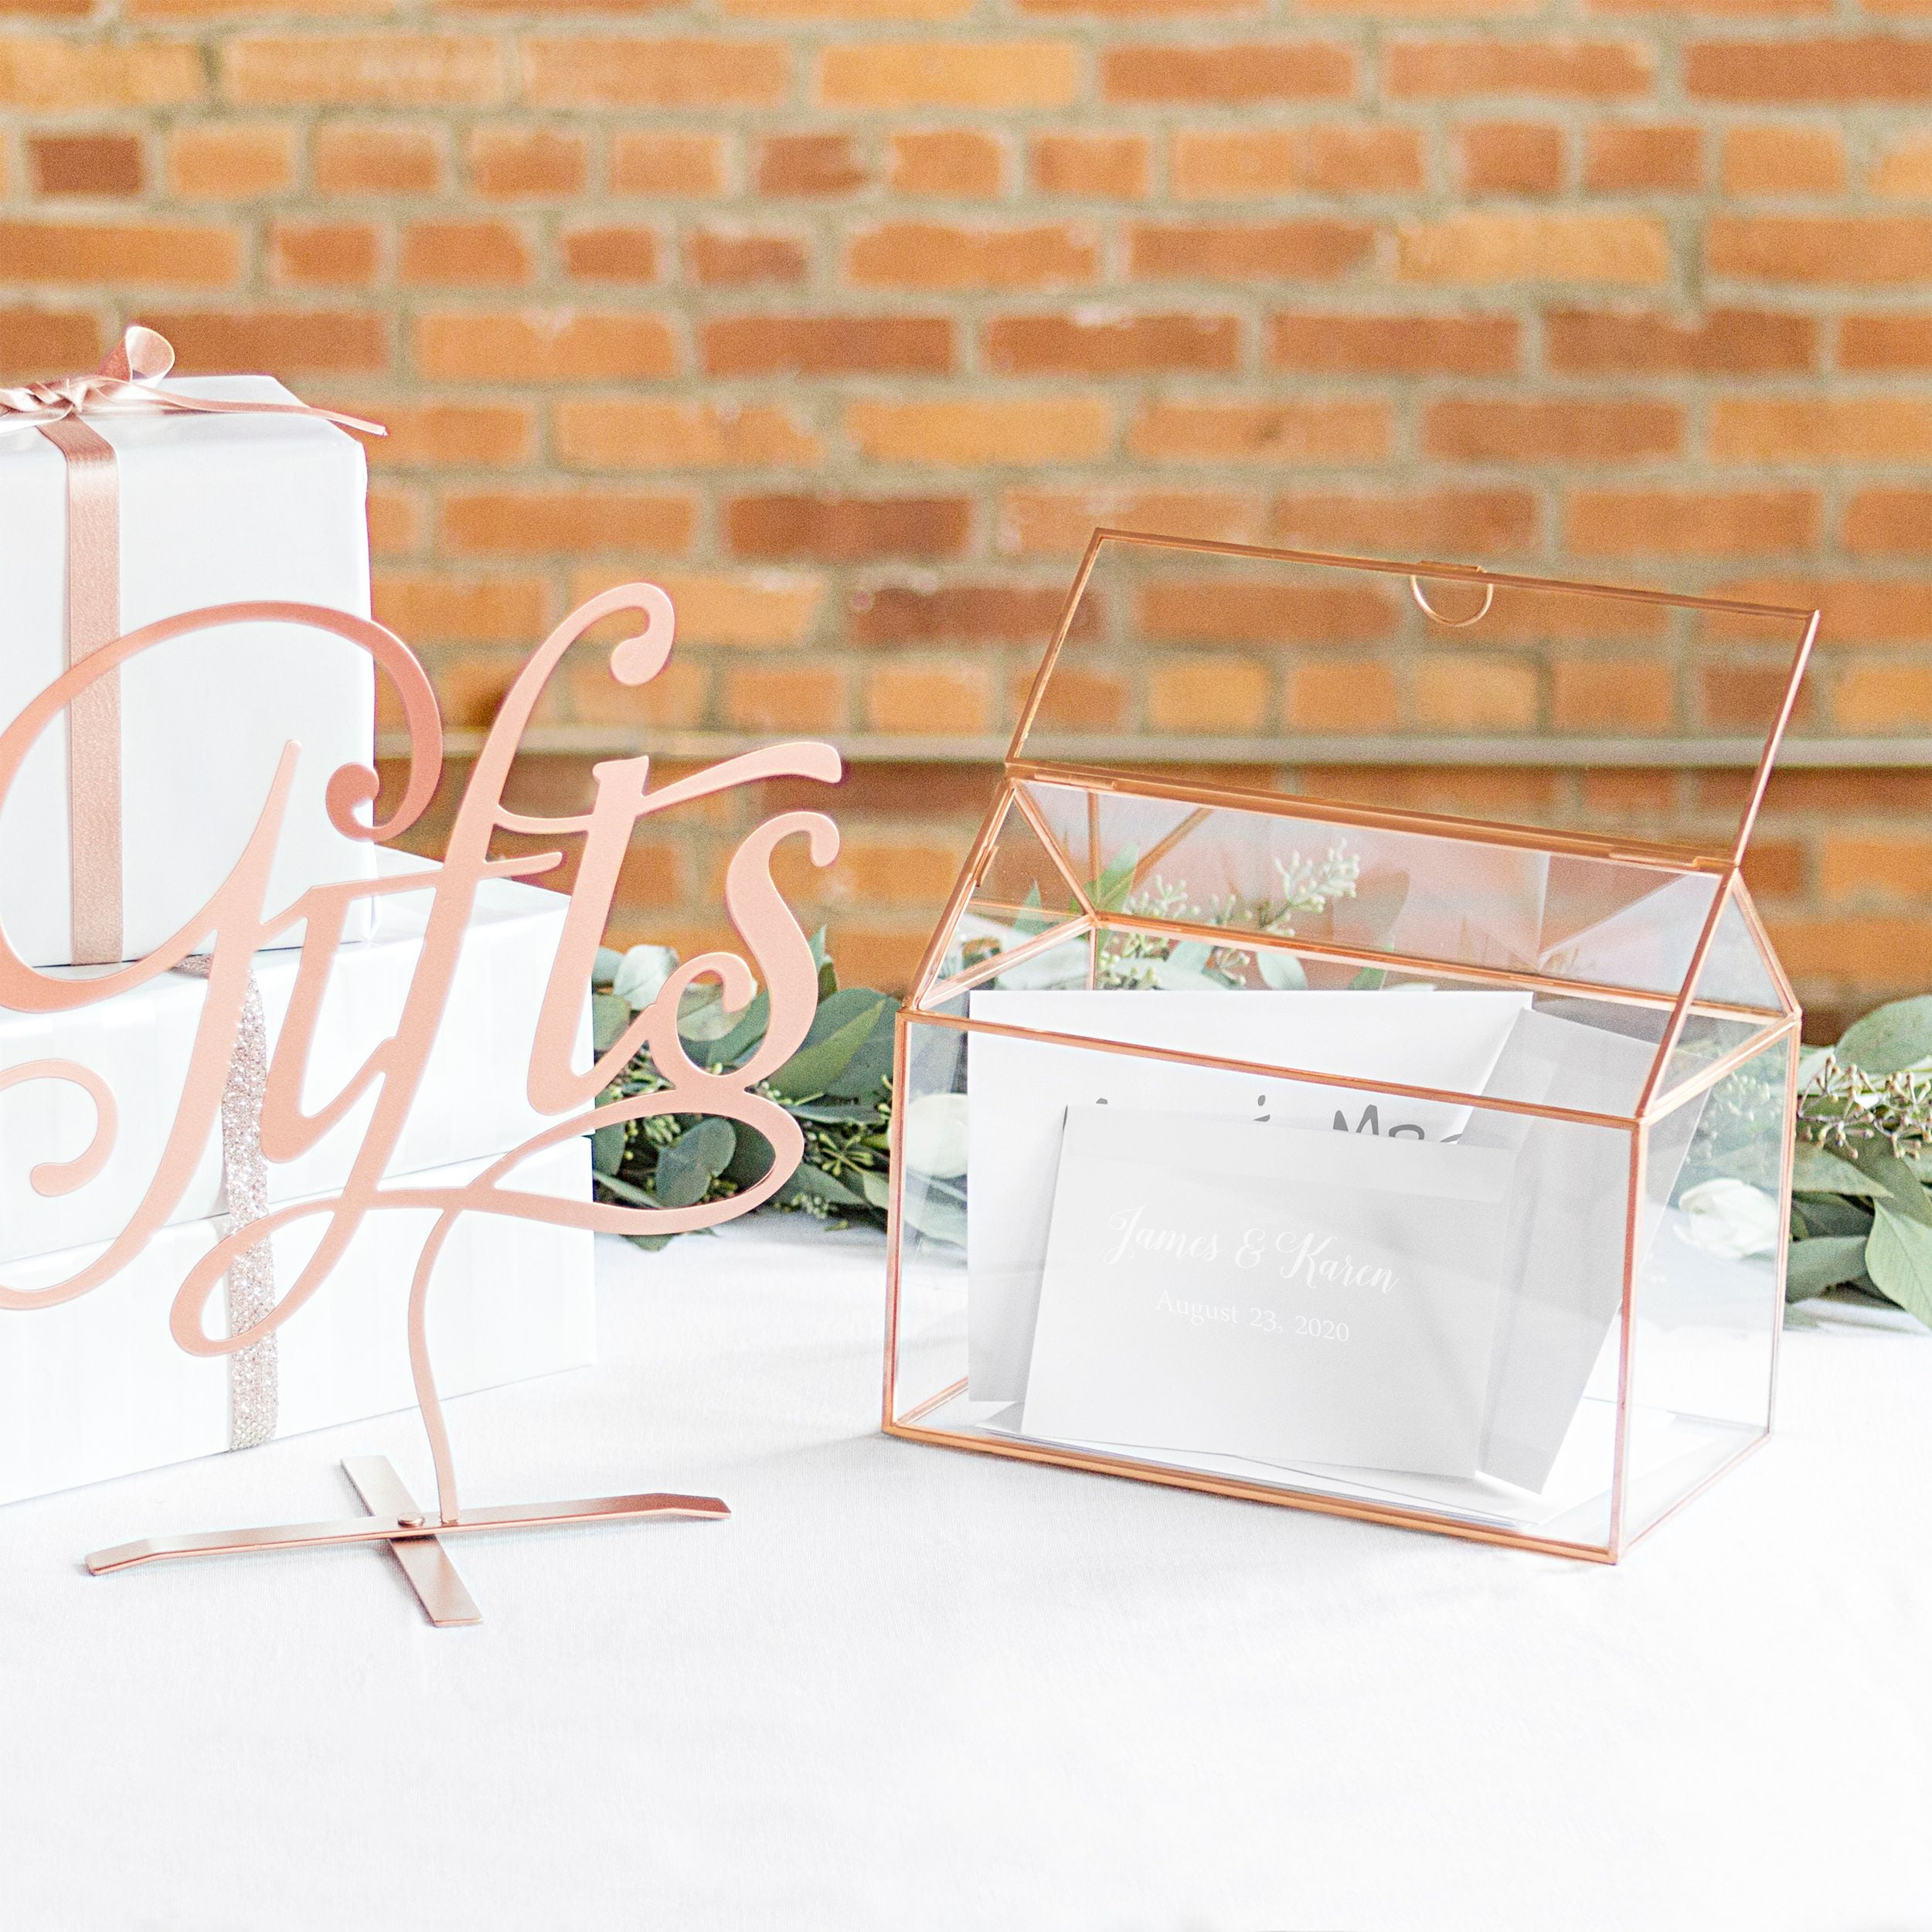 initial place card holders